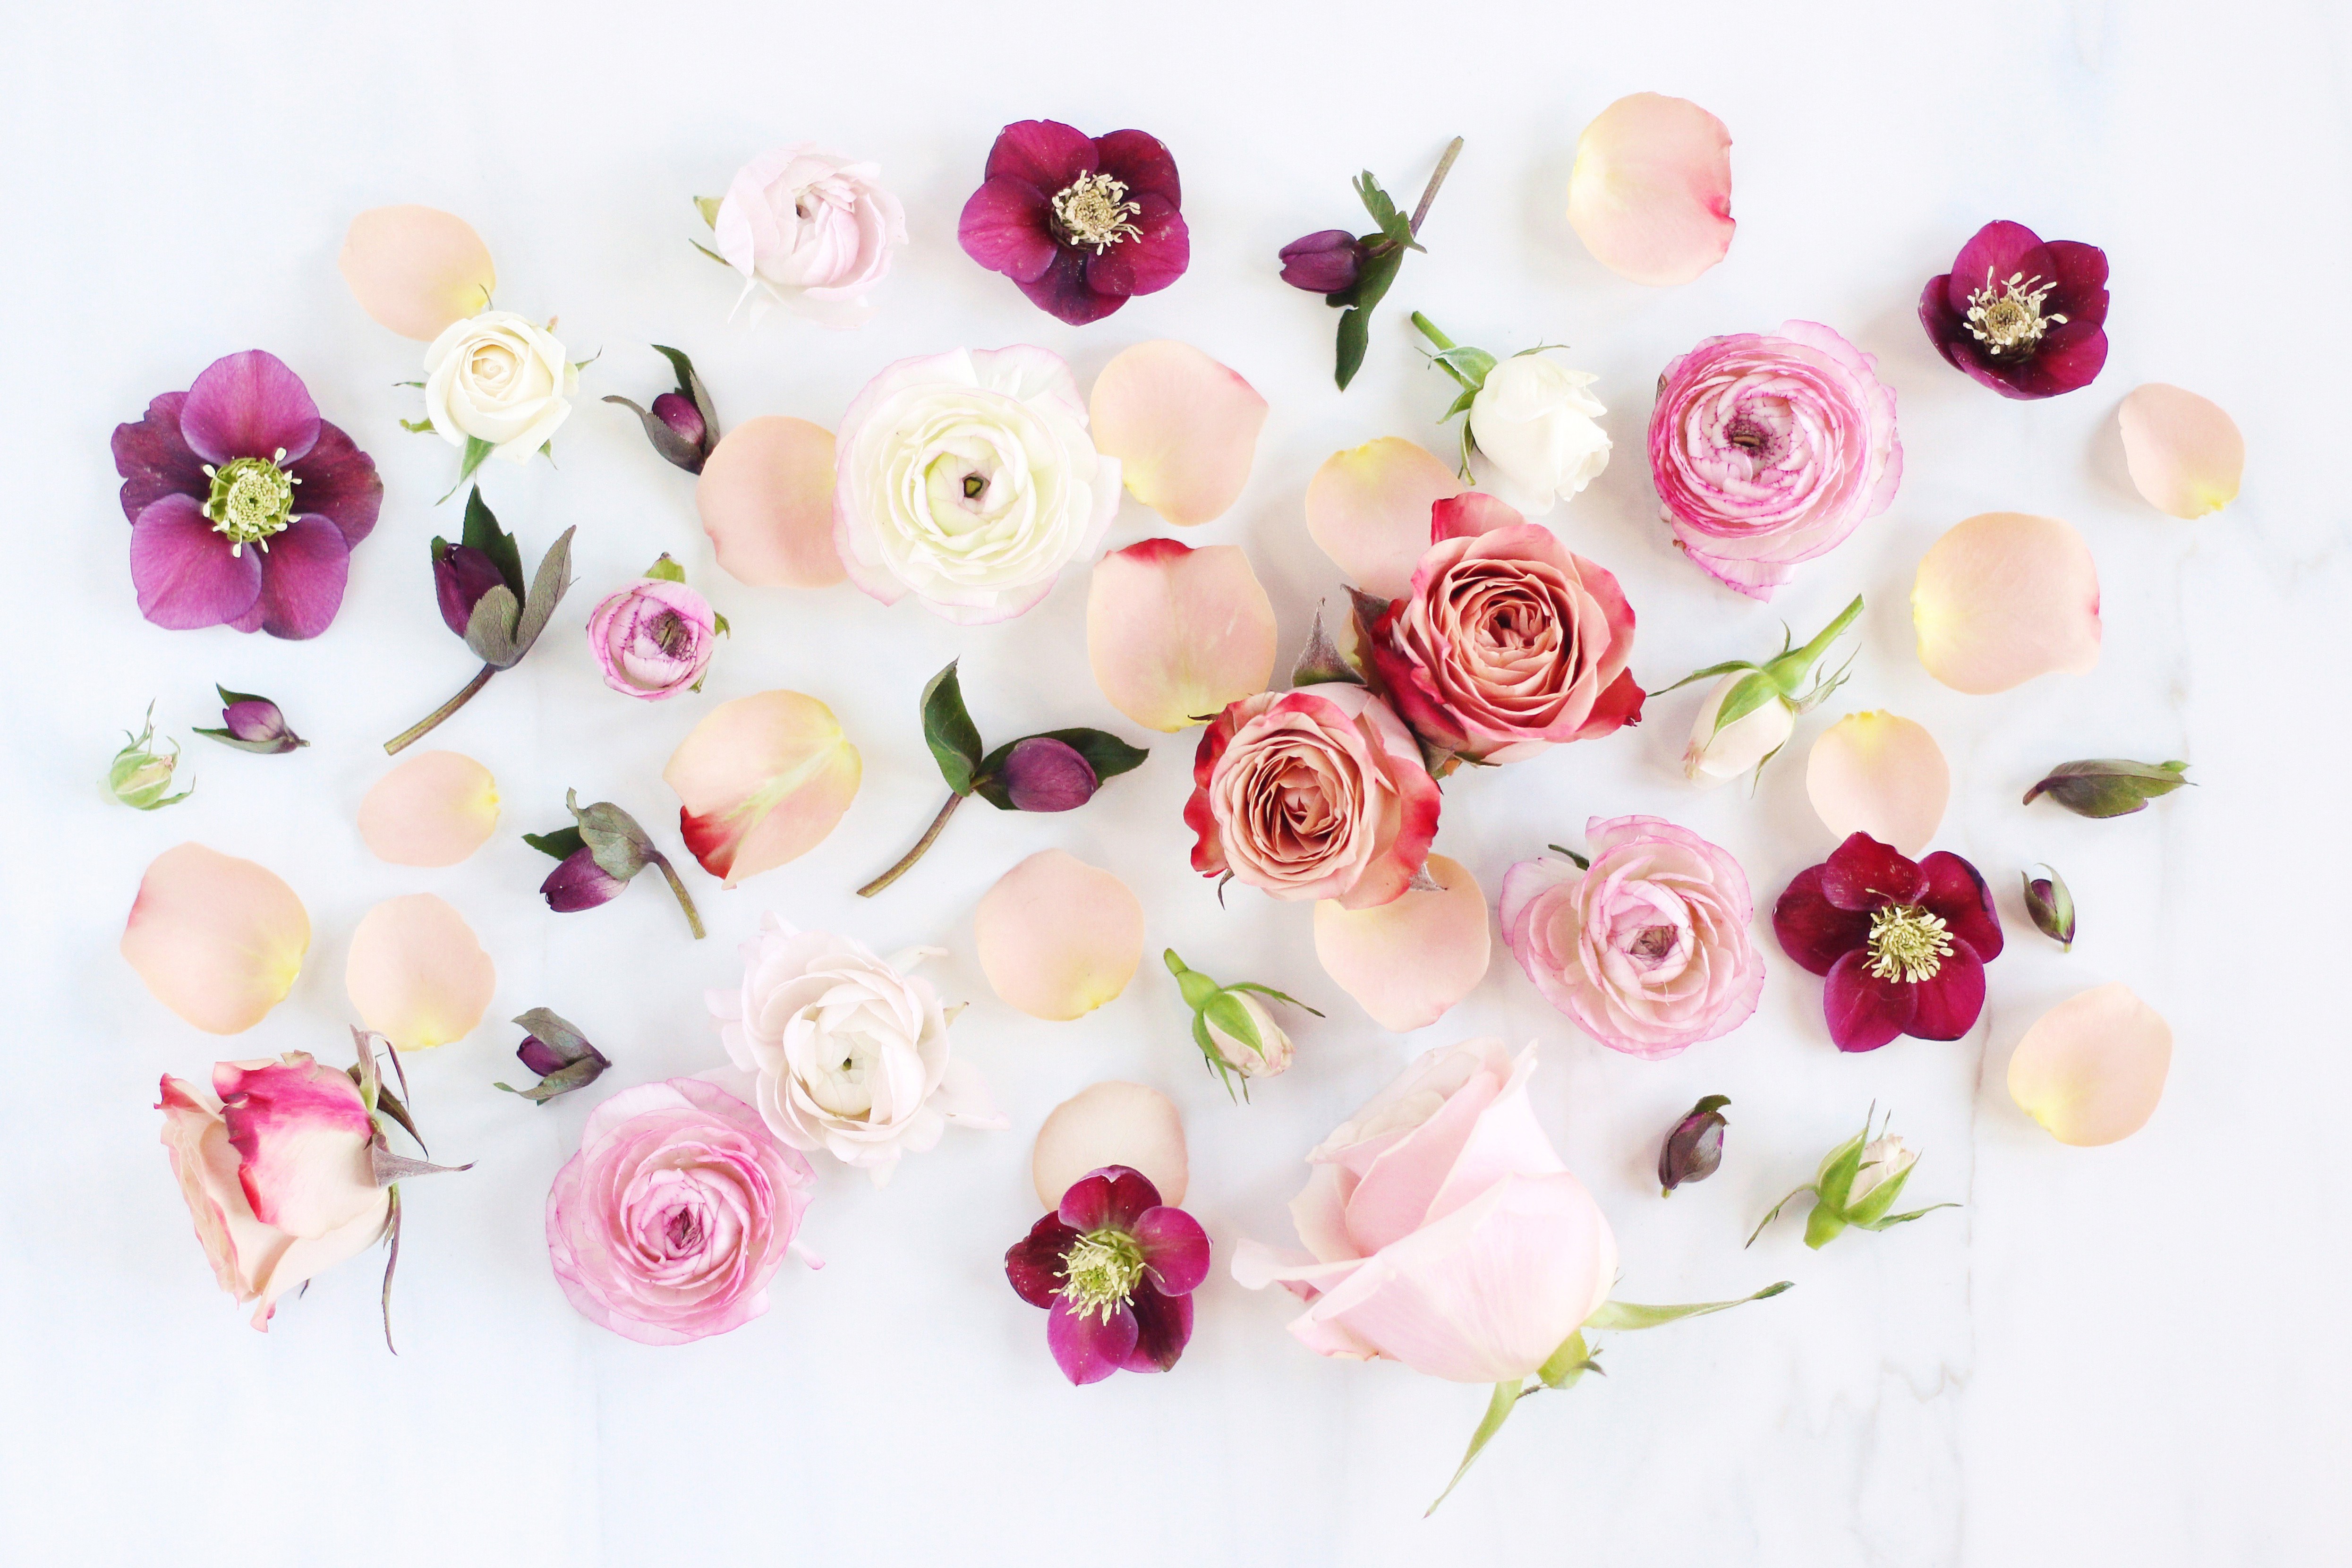 Roses, Anemones, and Peonies by Justine Celina